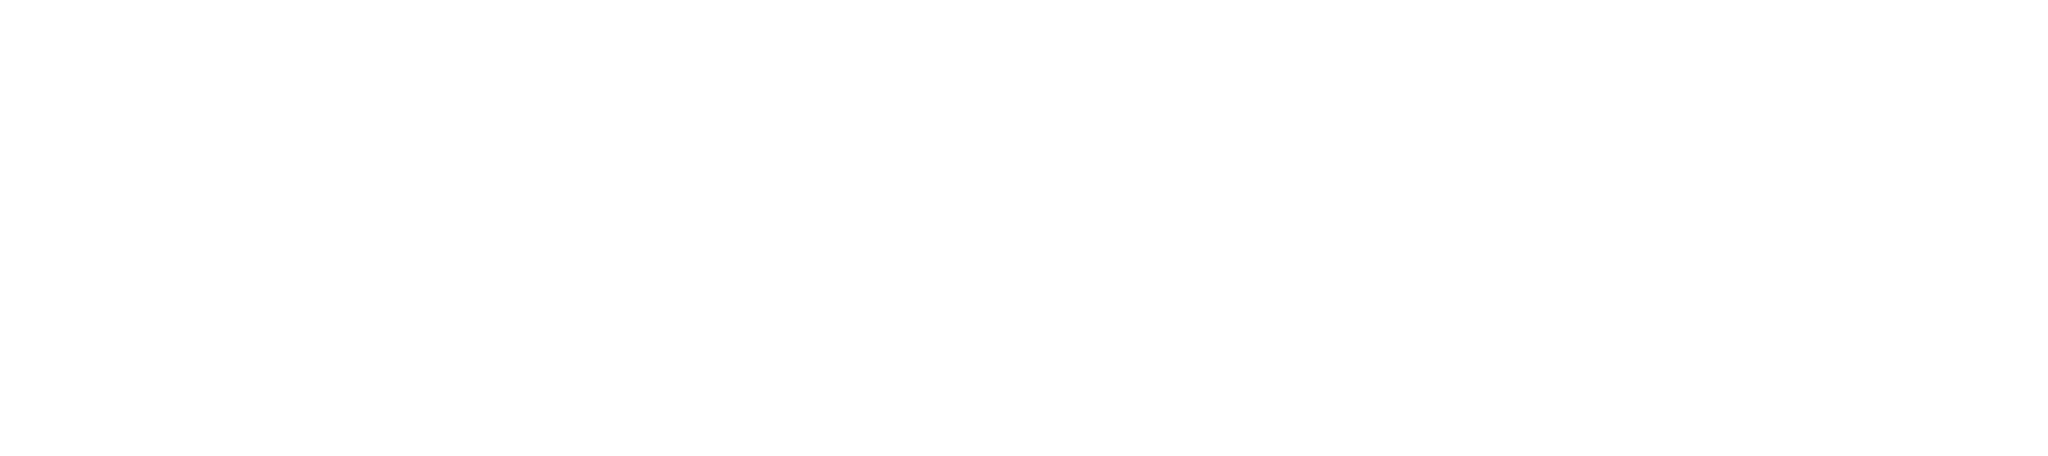 founded by the european union